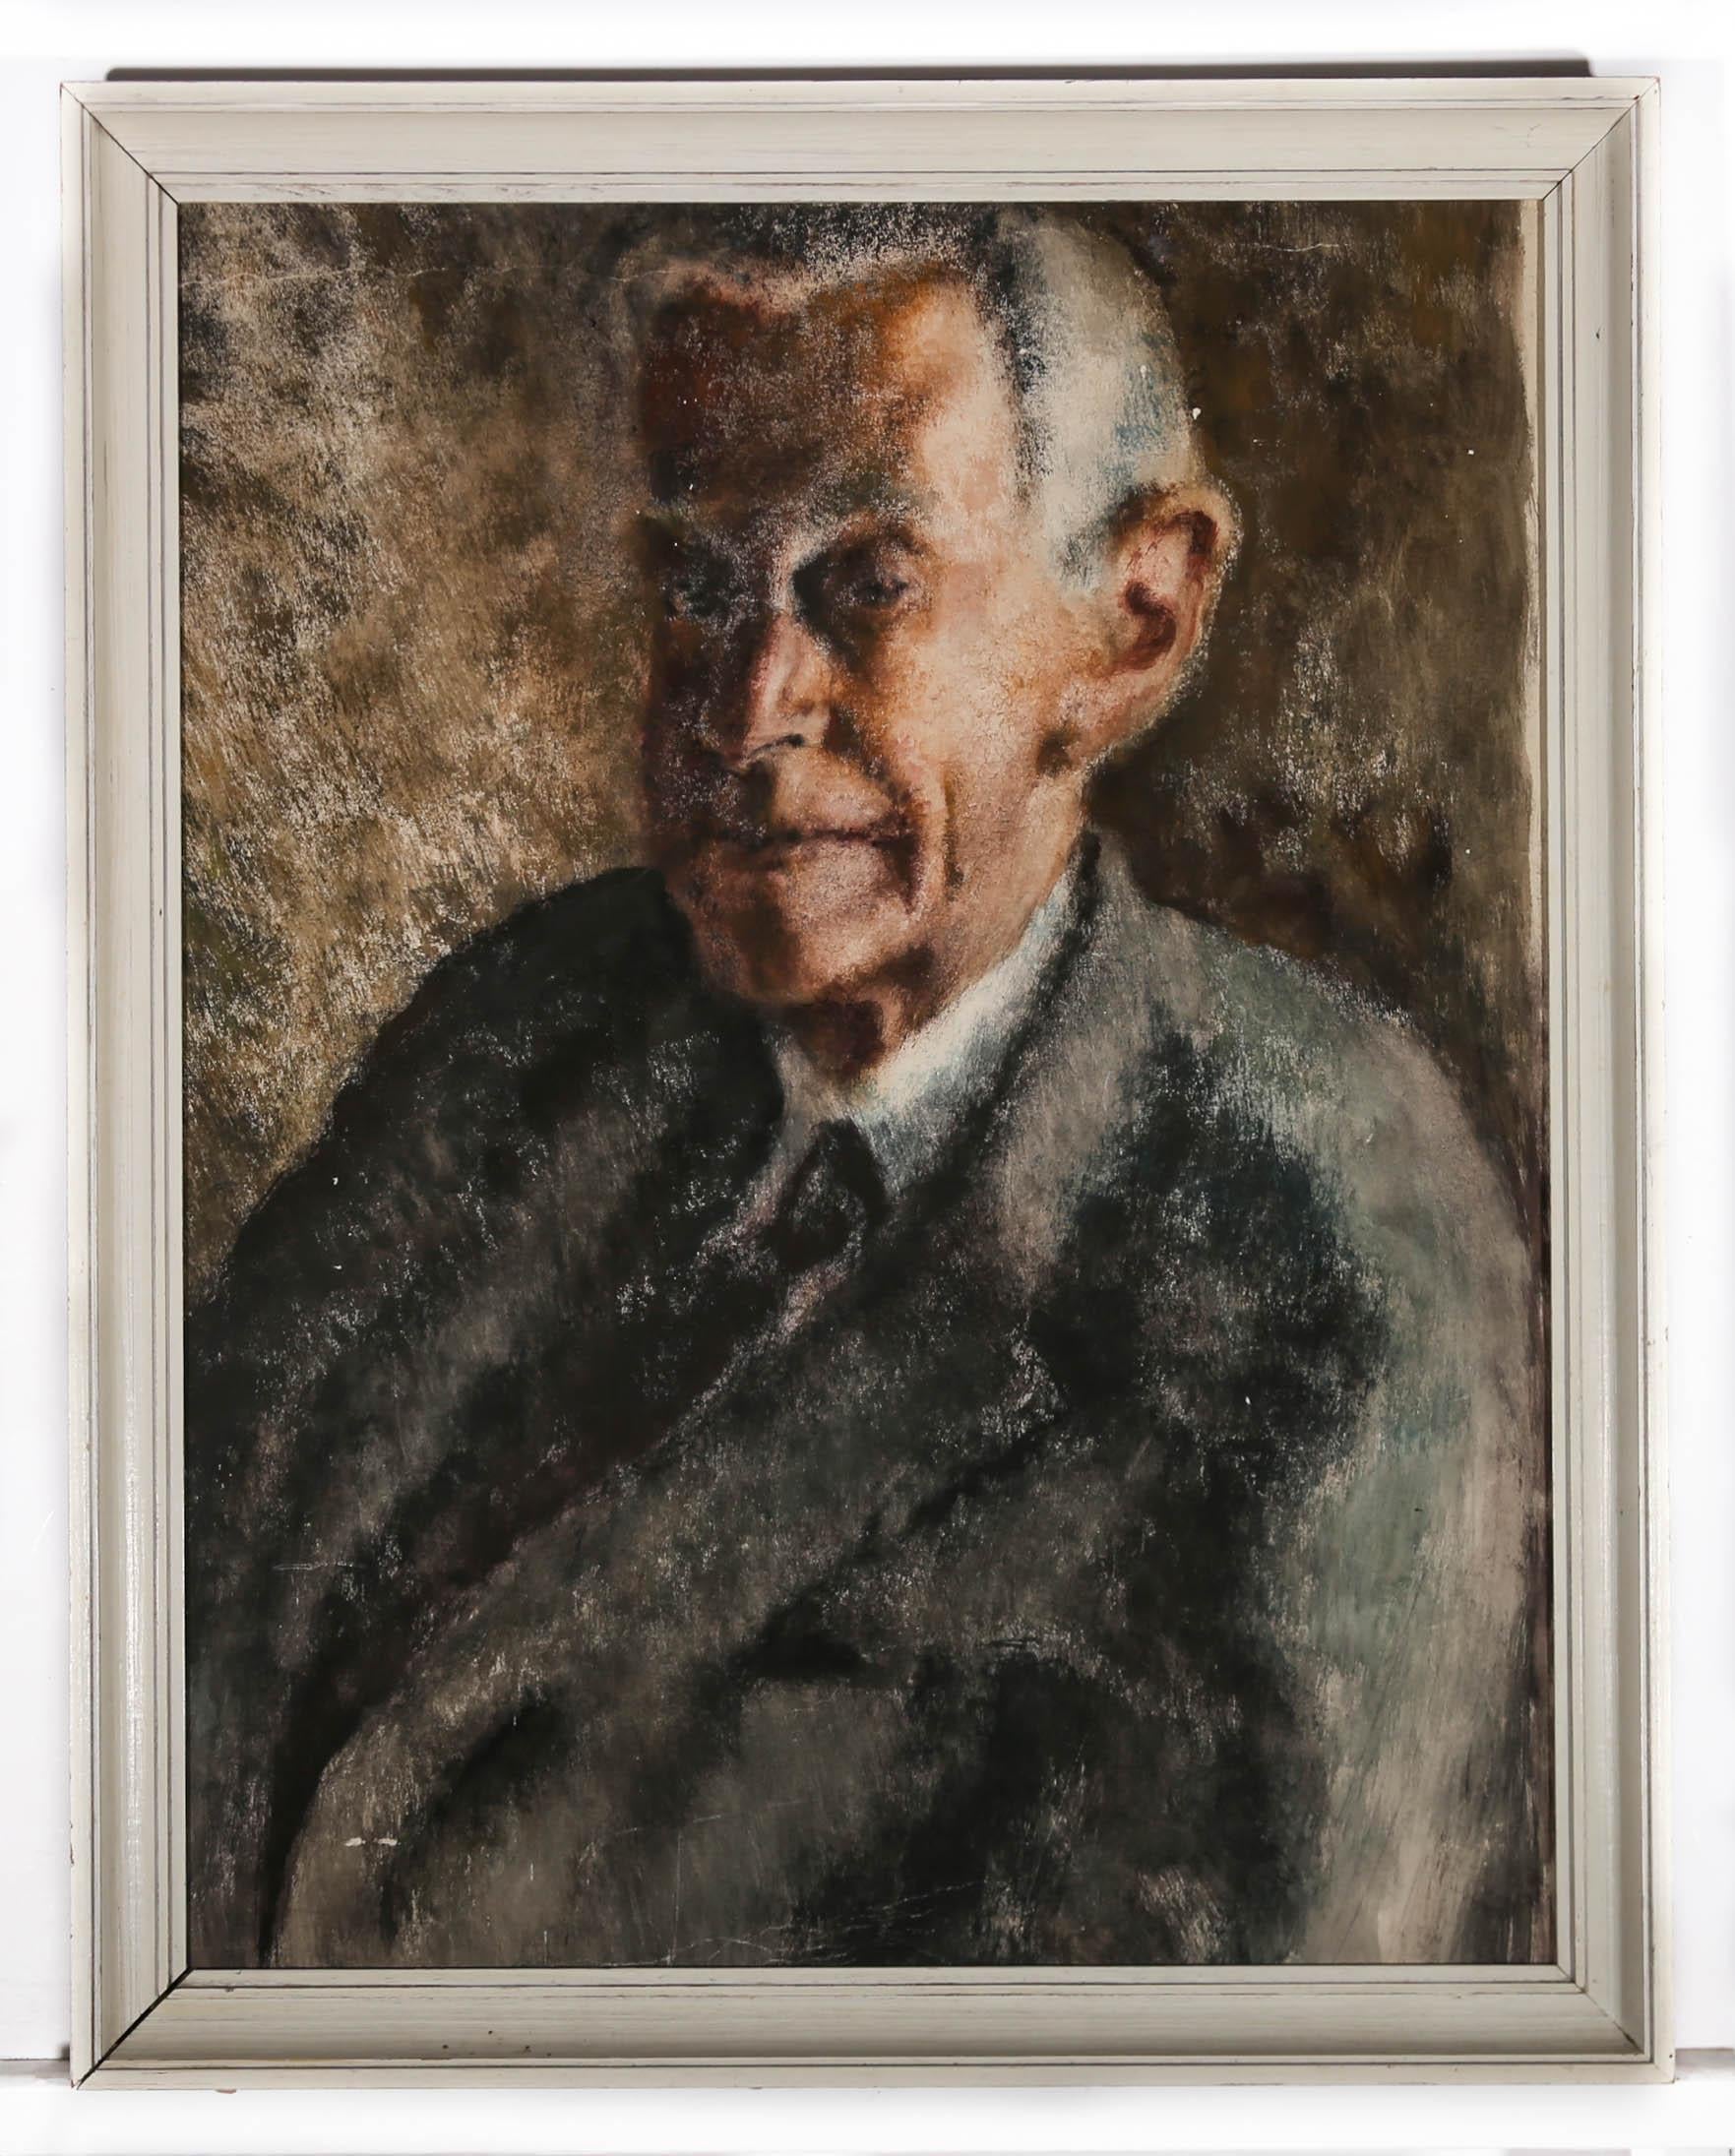 A charming portrait of a gentleman wearing a suit. he is painted in Disher's signature dry brush technique giving the portrait a slightly hazy appearance. Unsigned. Presented in a white wooden frame. On board.
